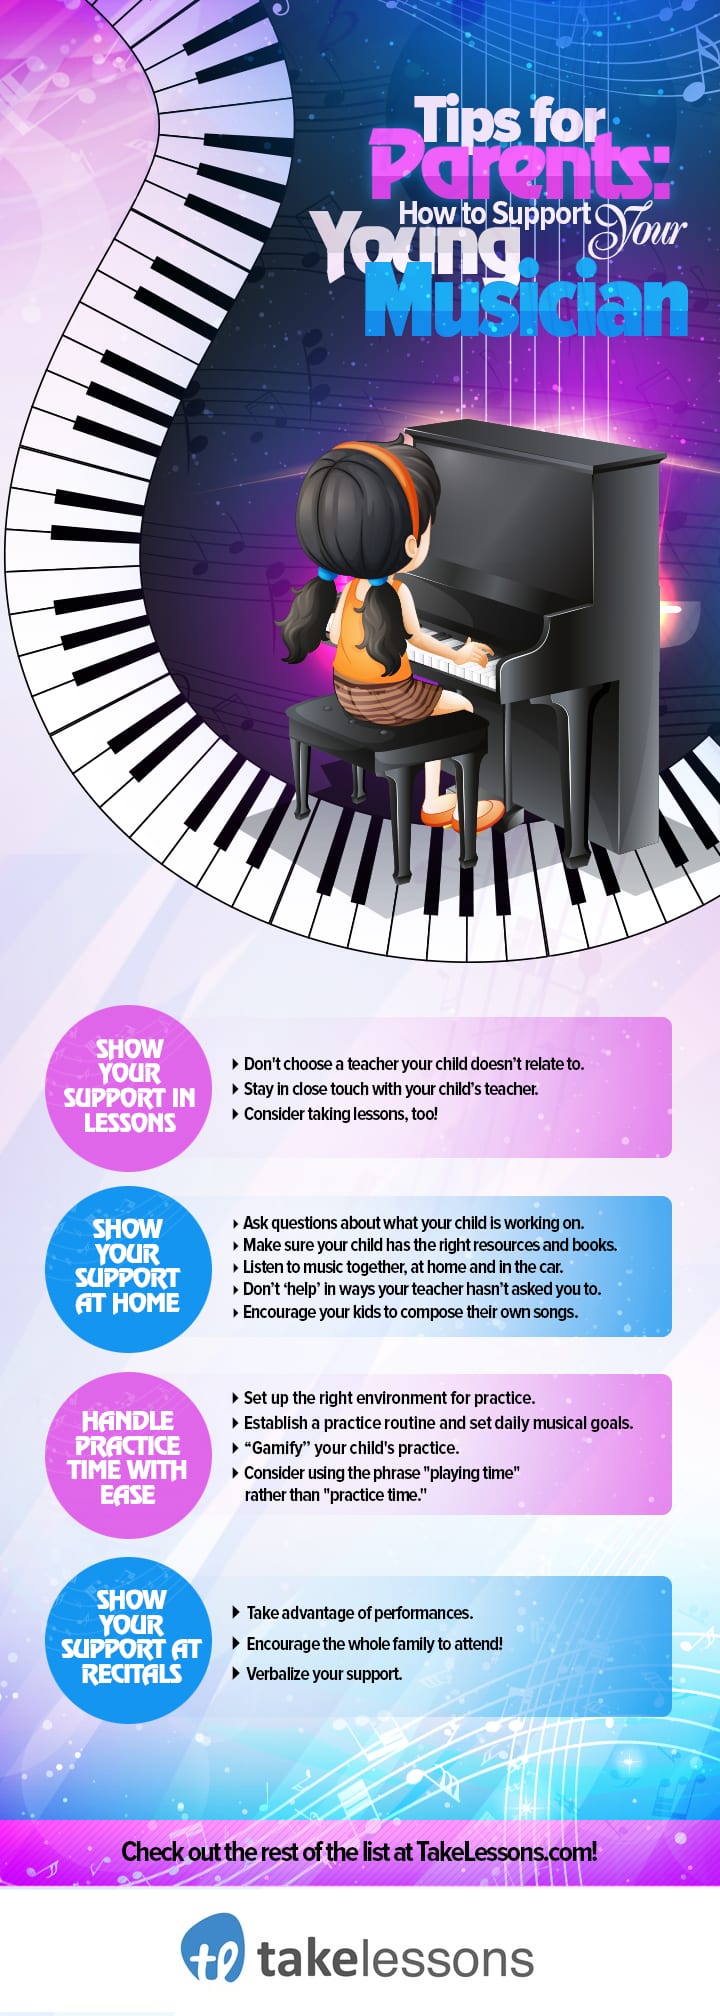 20+ Tips for Parents How to Support Your Young Musician